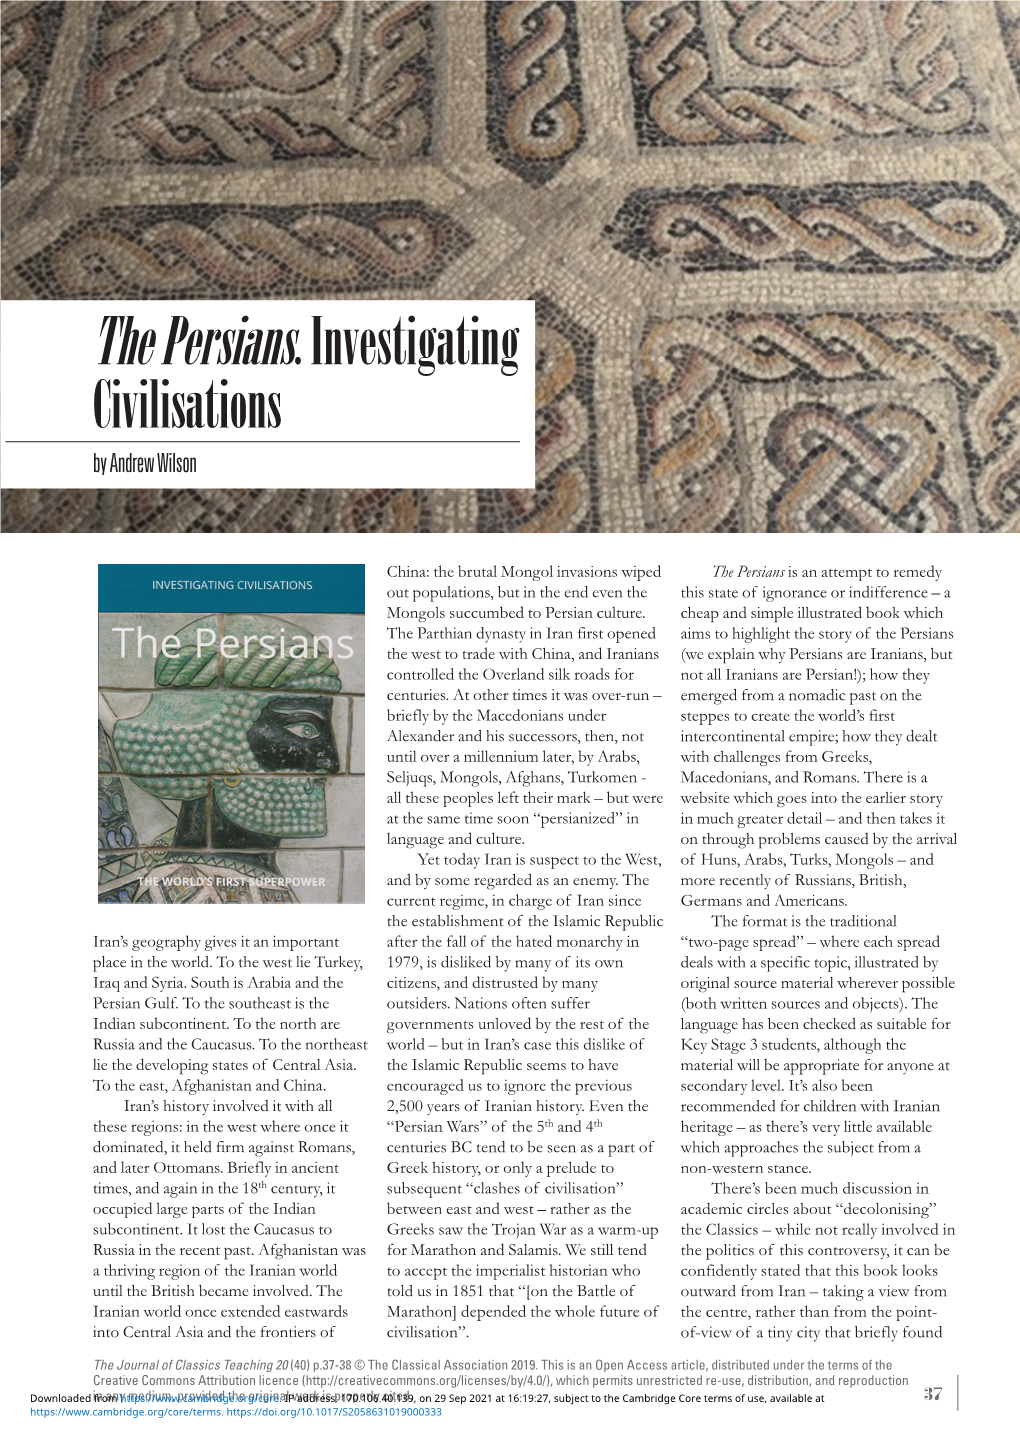 The Persians. Investigating Civilisations by Andrew Wilson